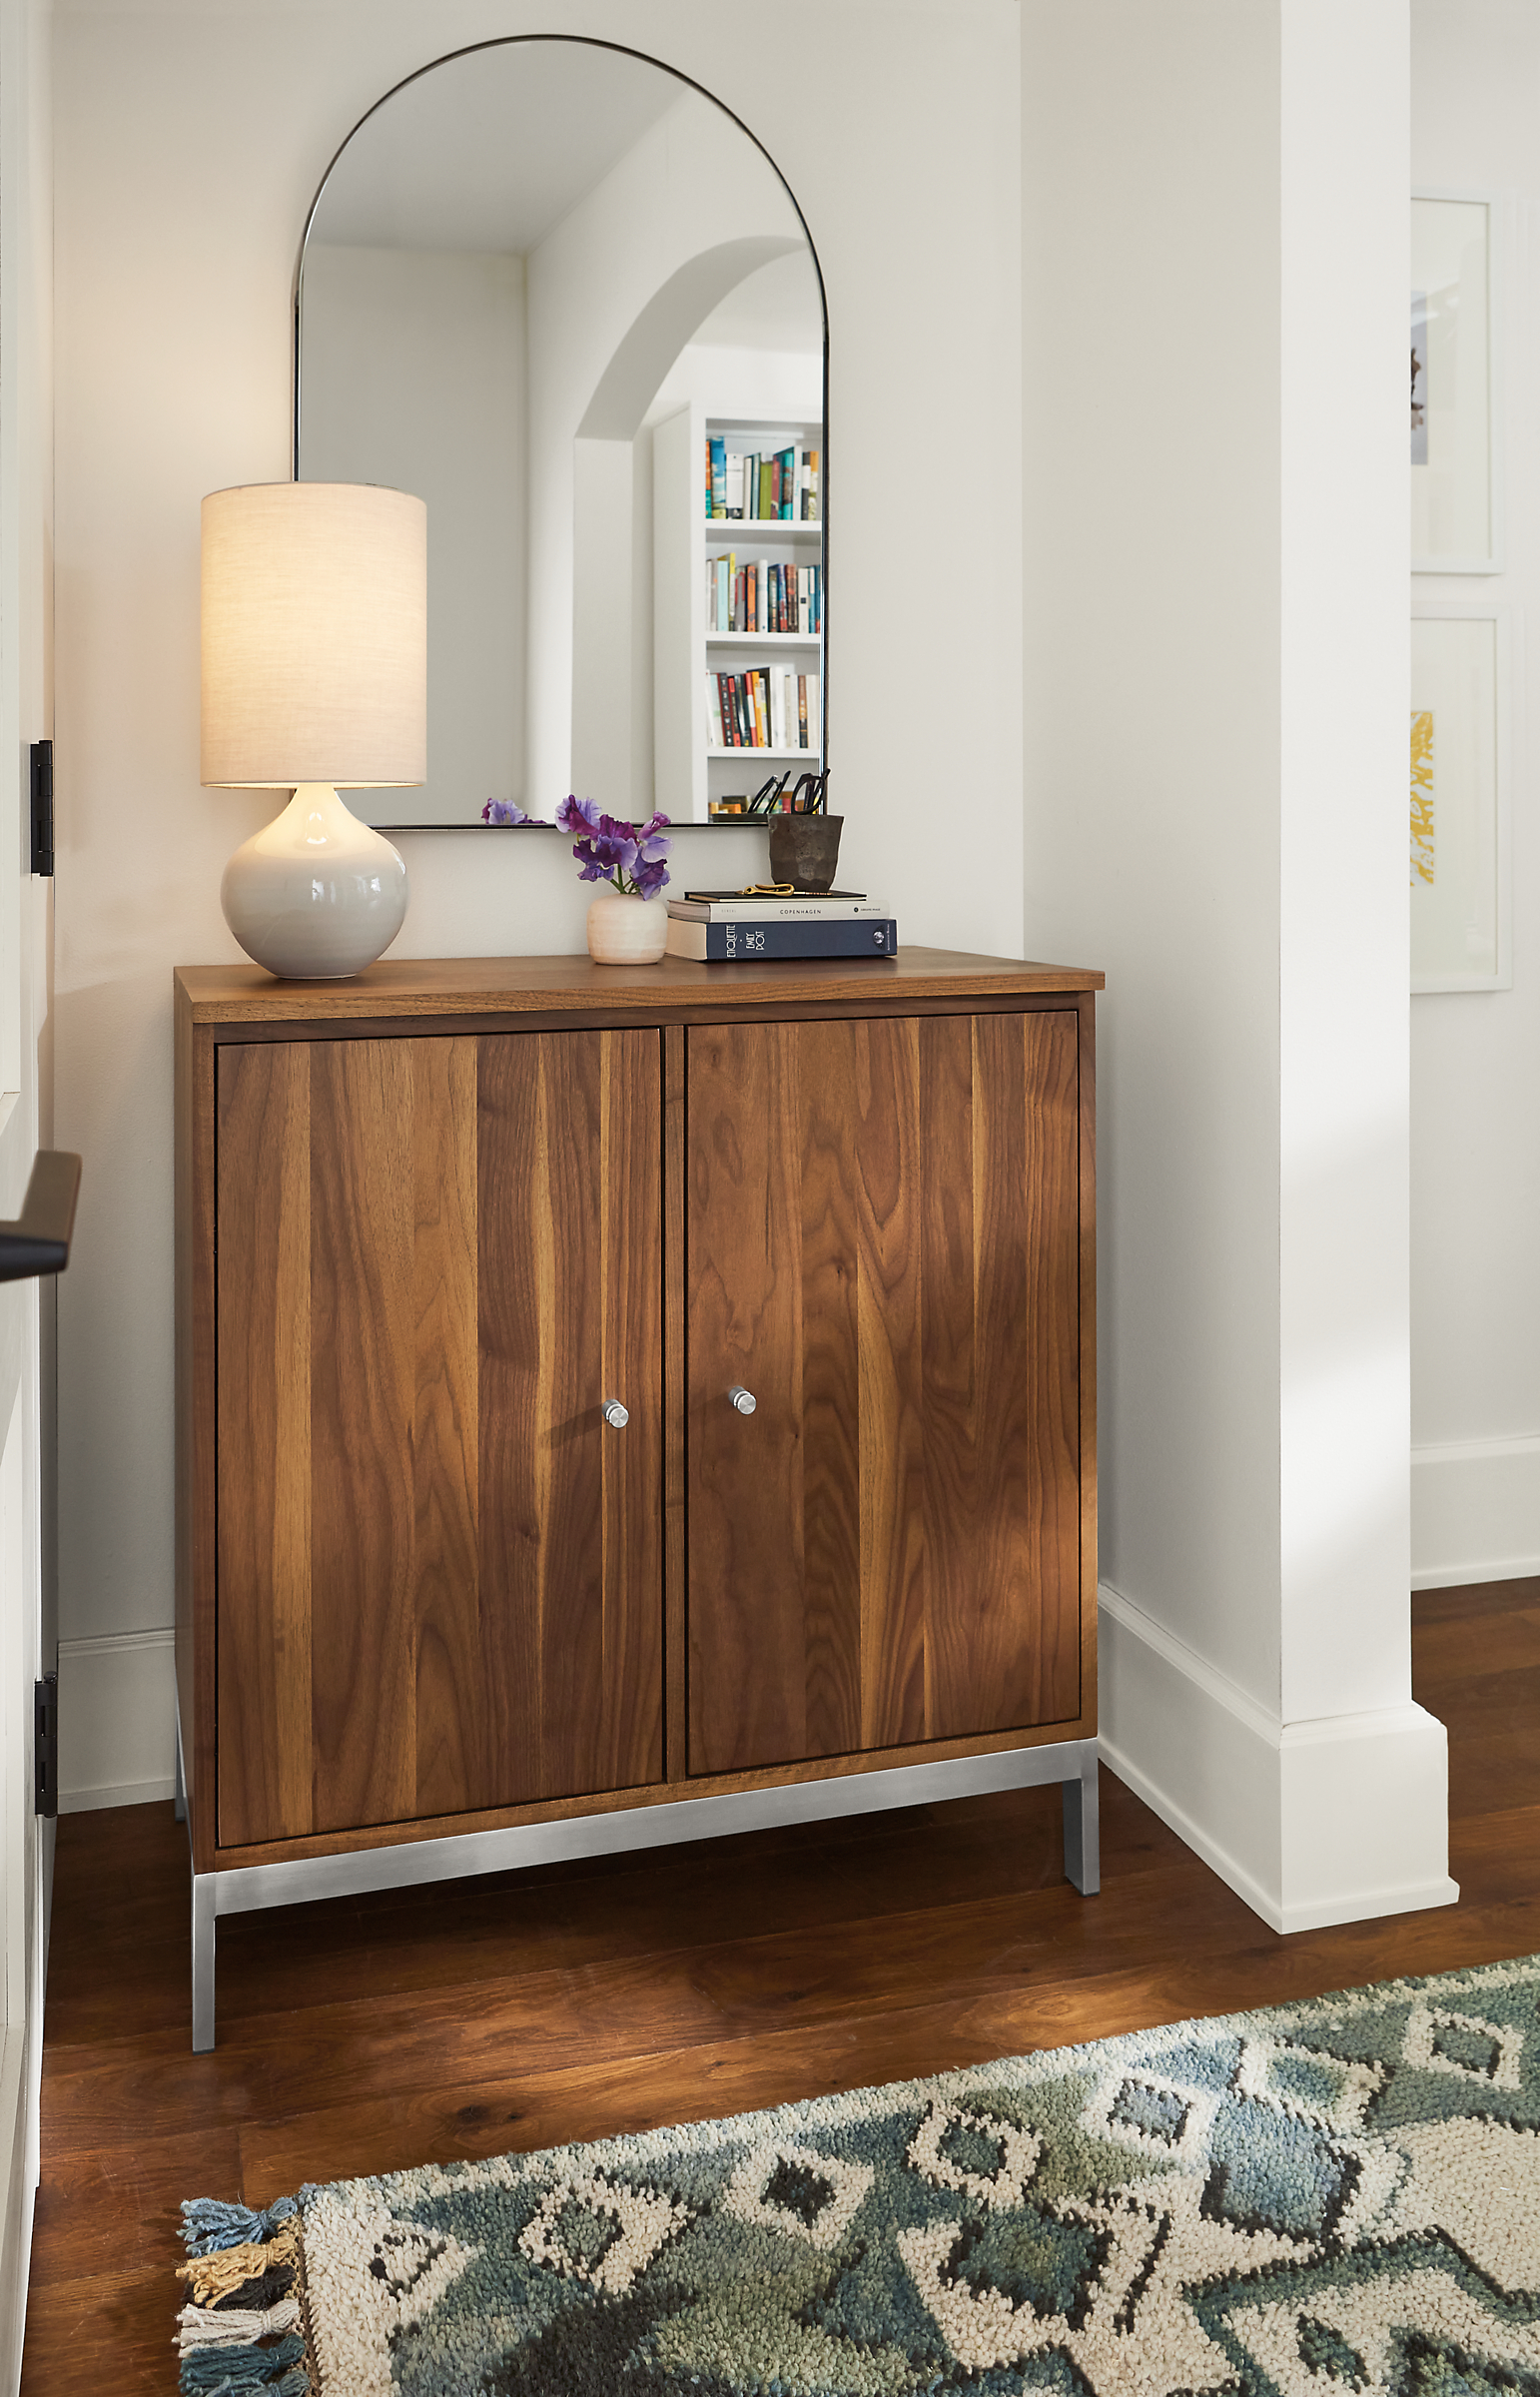 entryway featuring linear storage cabinet in walnut and stainless steel